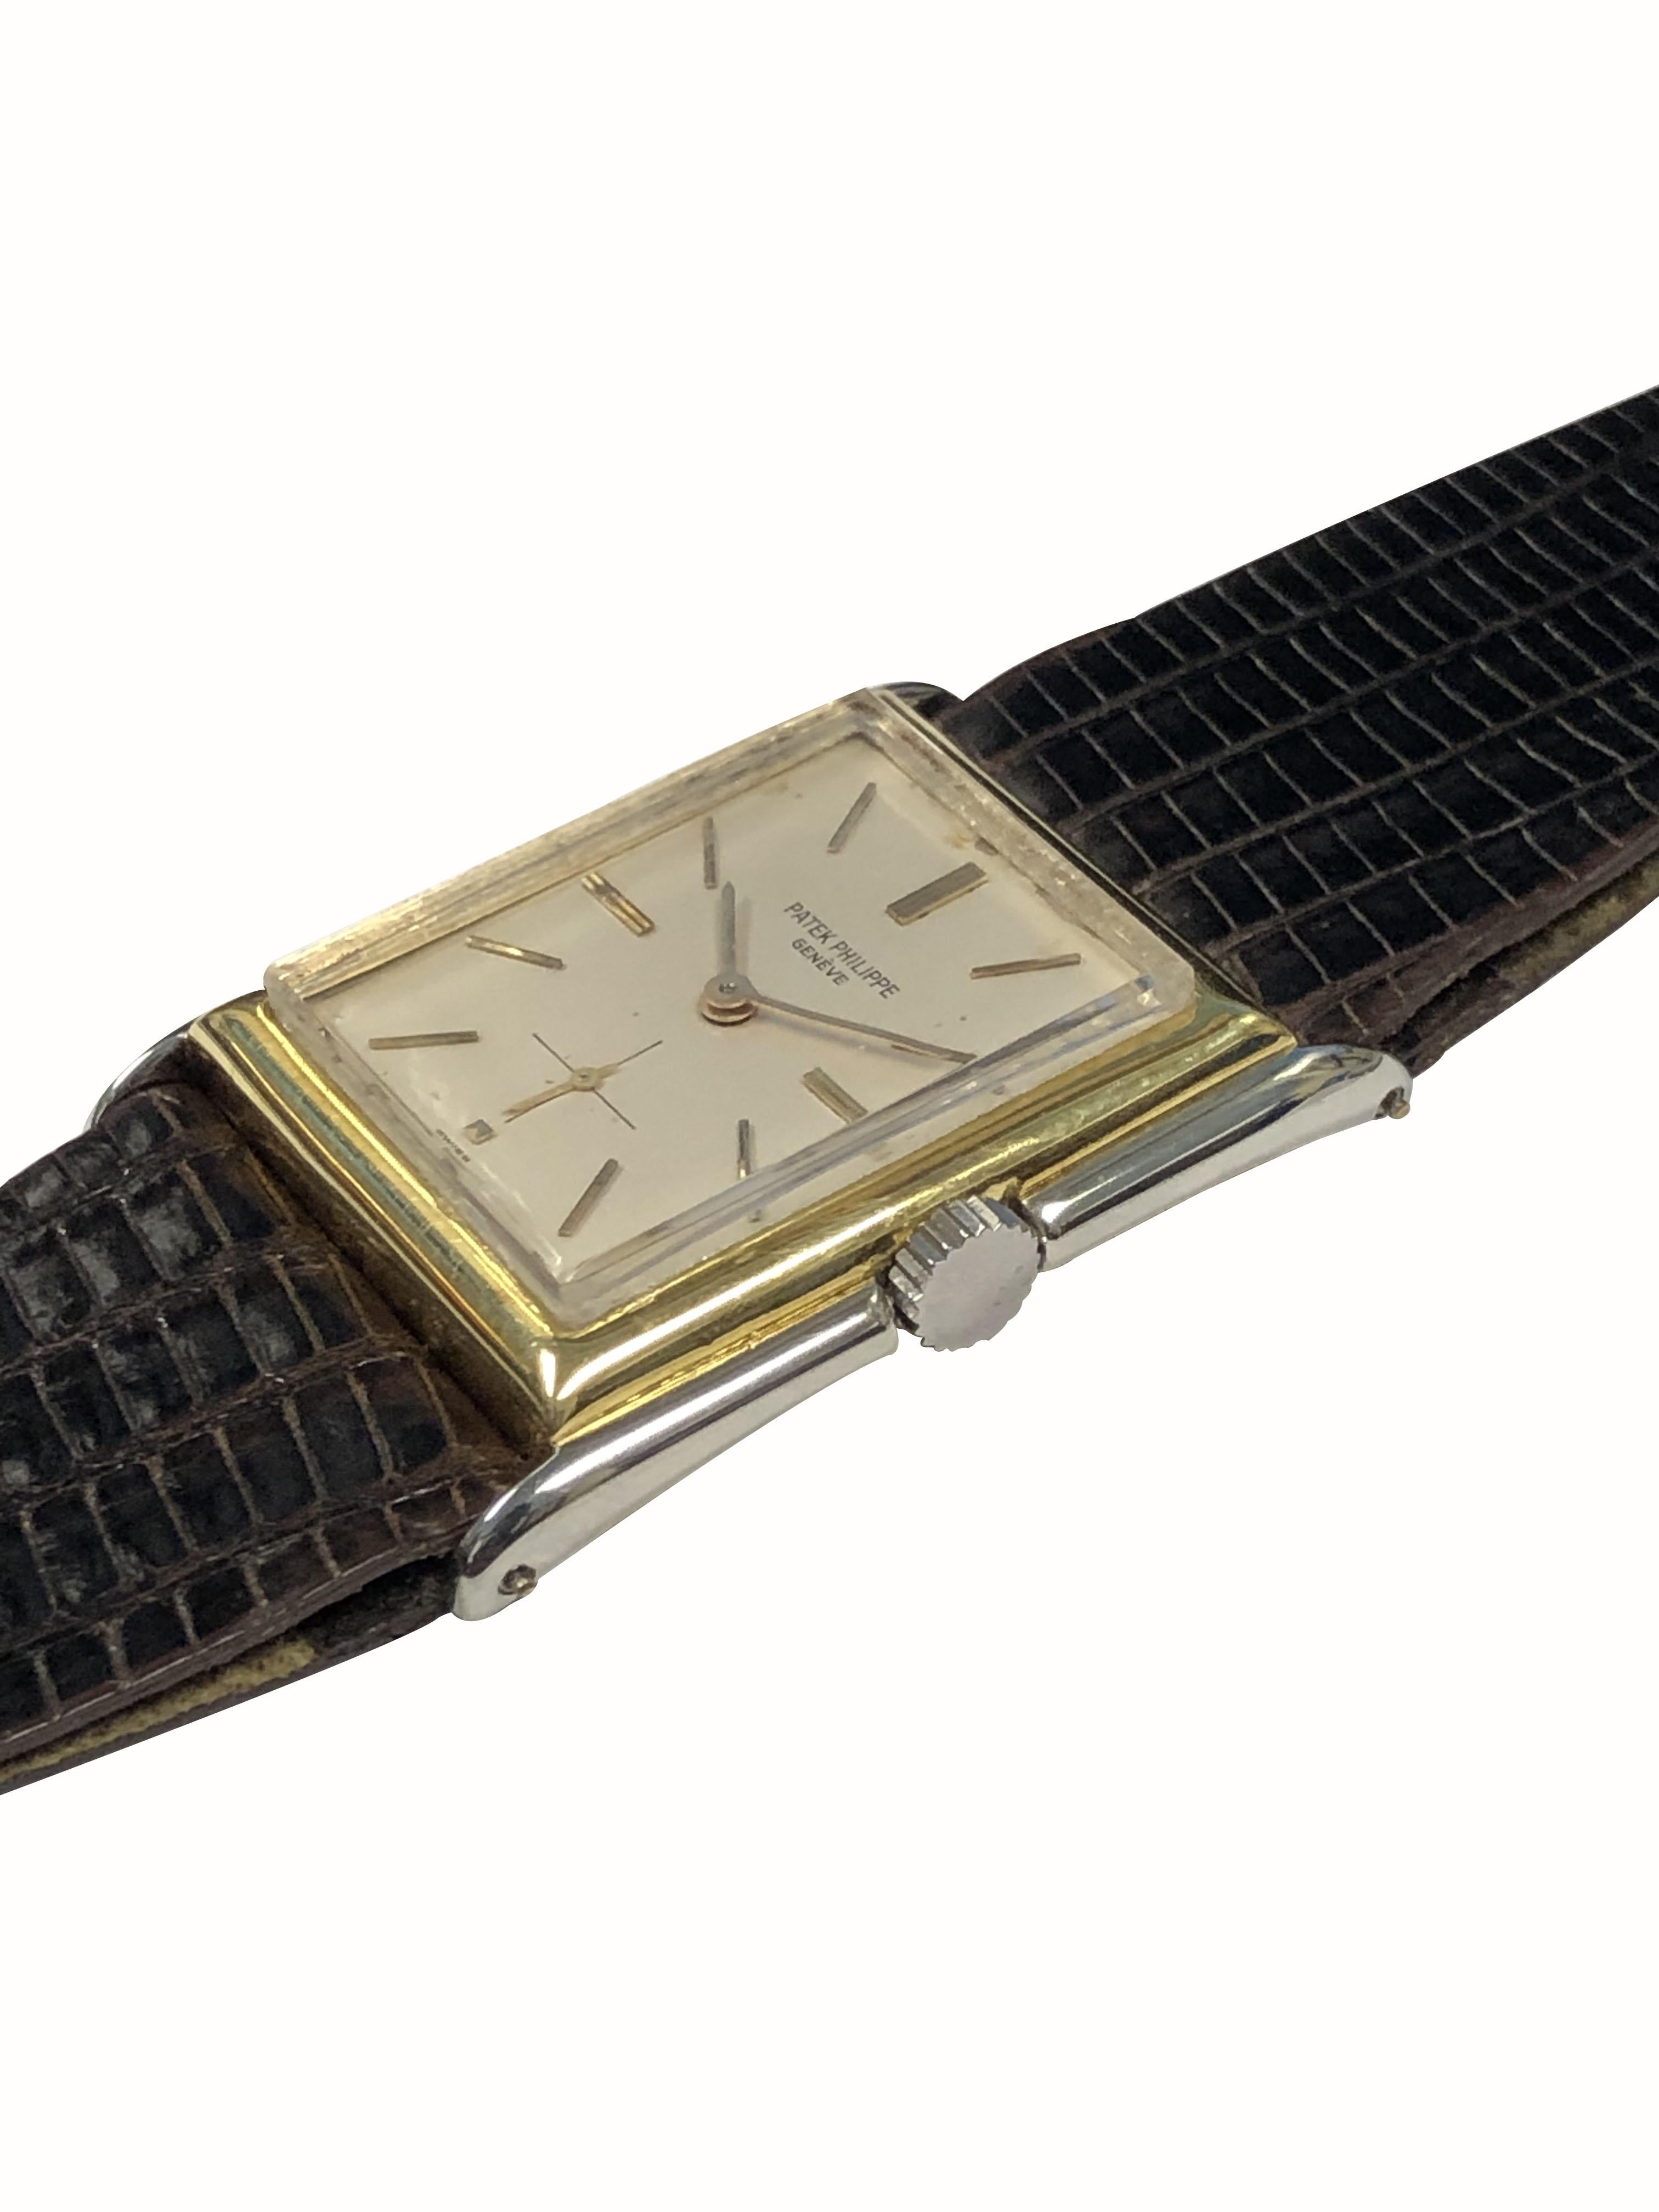 Circa 1920s Patek Philippe Wrist Watch,  39 M.M. Lug end to end X 29 M.M. 18K White and Yellow Gold 2 Piece Hinged Stepped case with slight Flared Lugs. Mechanical, manual wind 18 Jewel Nickle Lever movement. Silver Satin dial with raised Gold